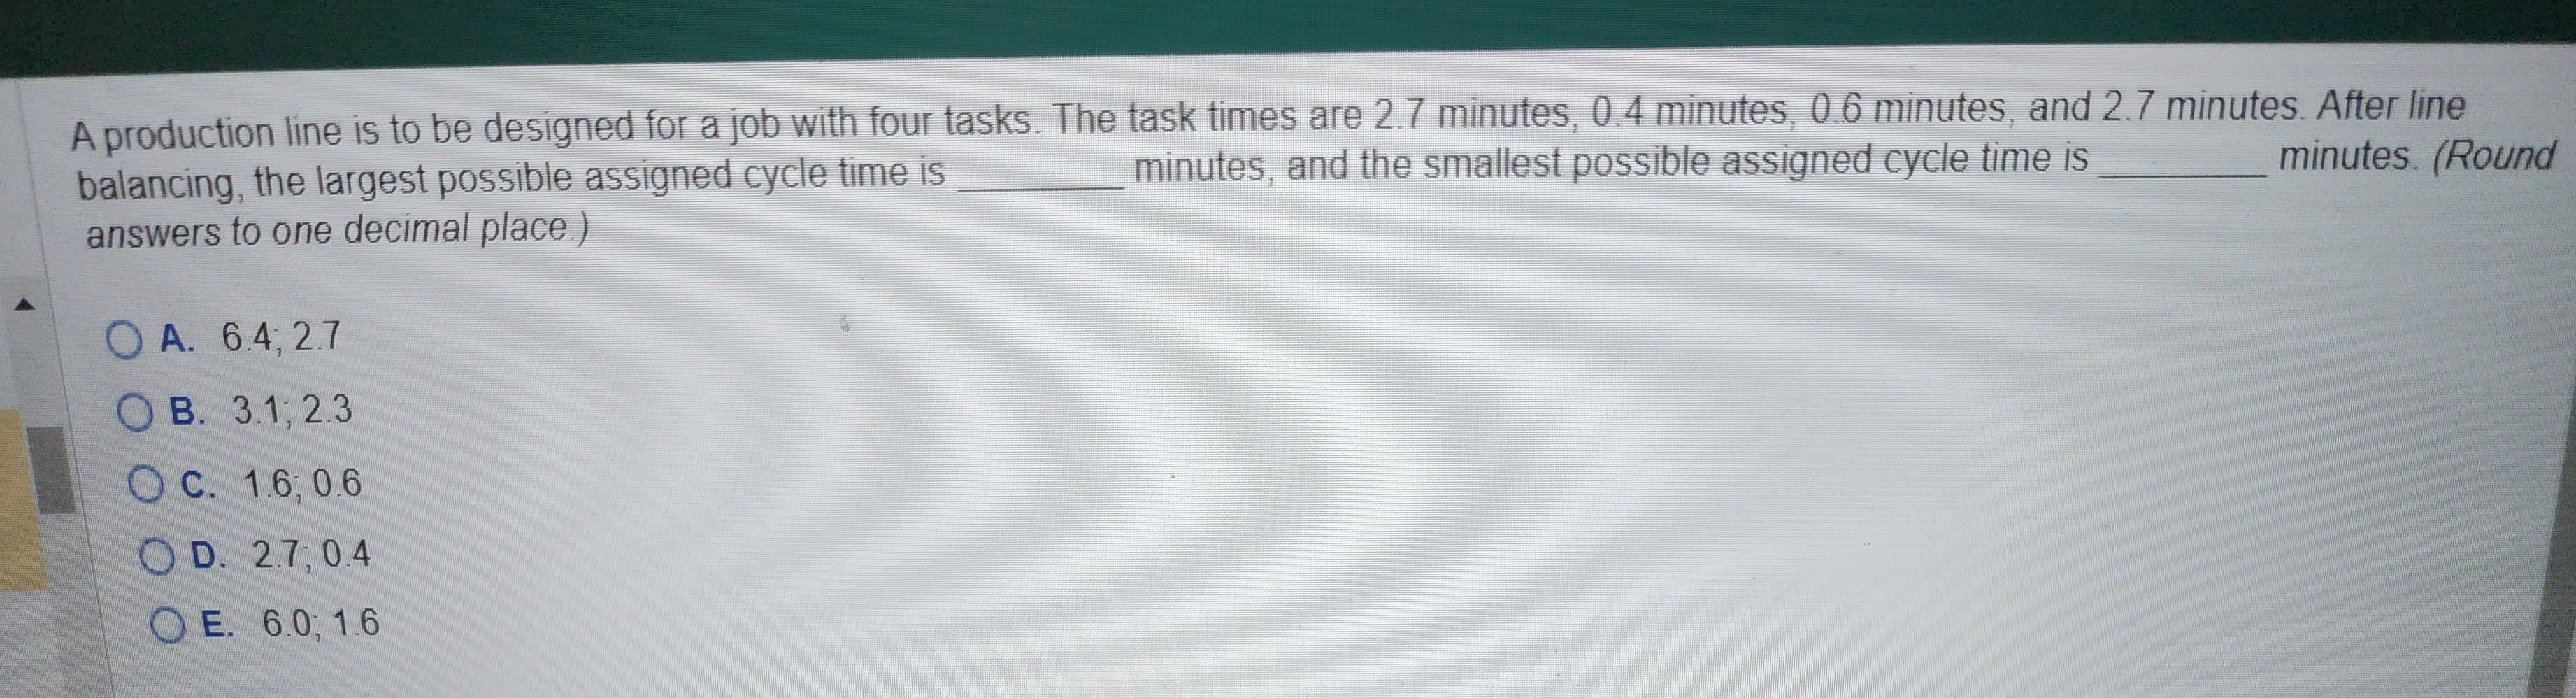 A production line is to be designed for a job with four tasks. The task times are 2.7 minutes, 0.4 minutes, 0.6 minutes, and 2.7 minutes. After line
minutes, and the smallest possible assigned cycle time is
minutes. (Round
balancing, the largest possible assigned cycle time is
answers to one decimal place.)
OA. 6.4, 2.7
OB. 3.1, 2.3
OC. 1.6, 0.6
OD. 2.7, 0.4
OE. 6.0, 1.6